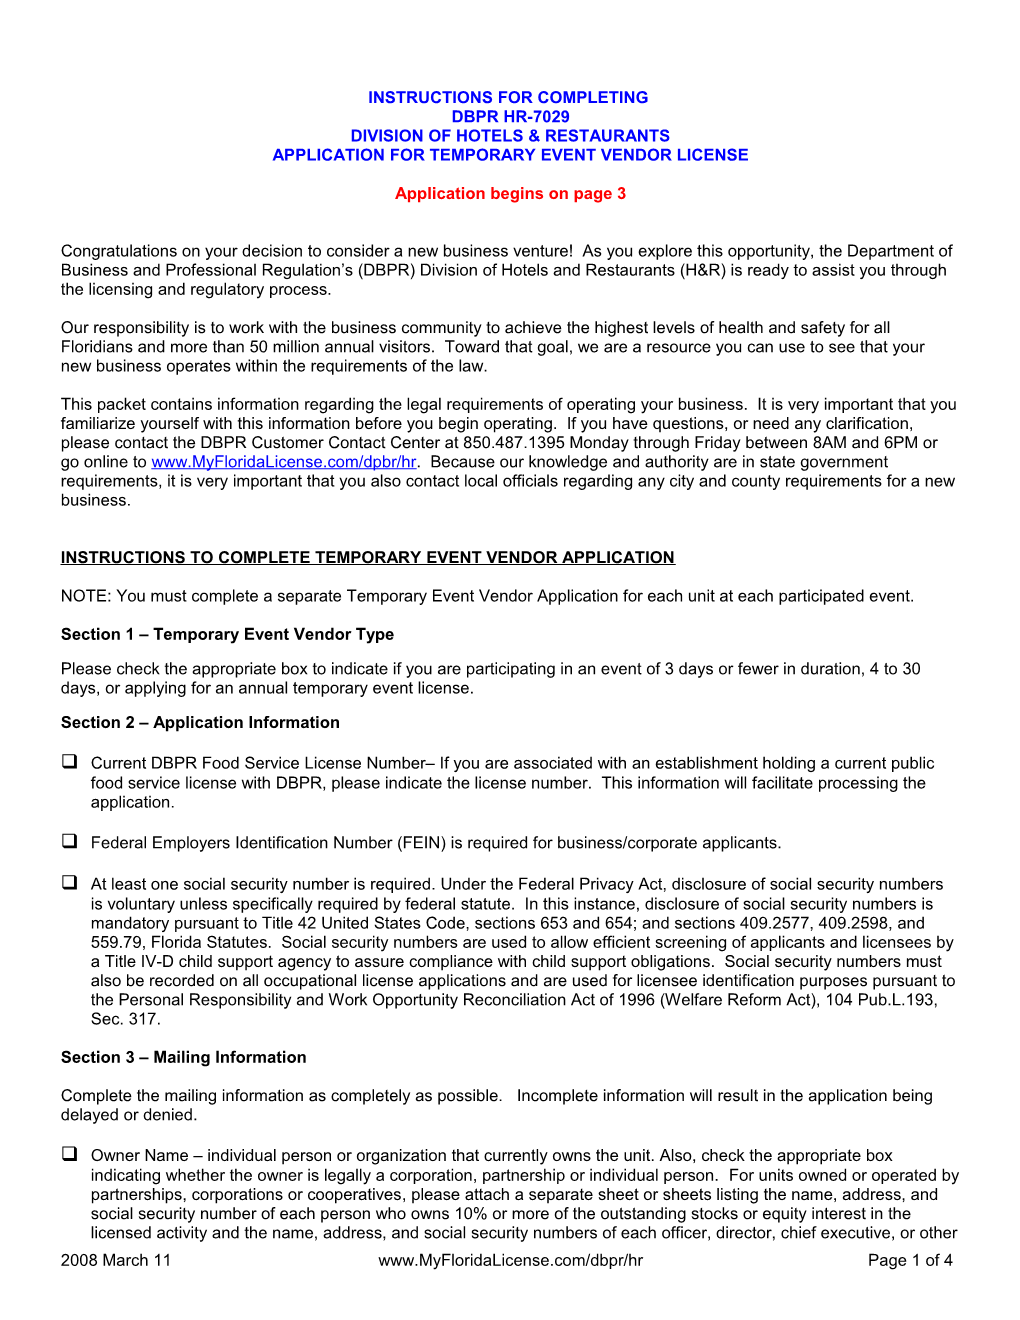 DBPR HR-7029 Division of Hotels and Restaurants Application for Temporary Event Vendor License